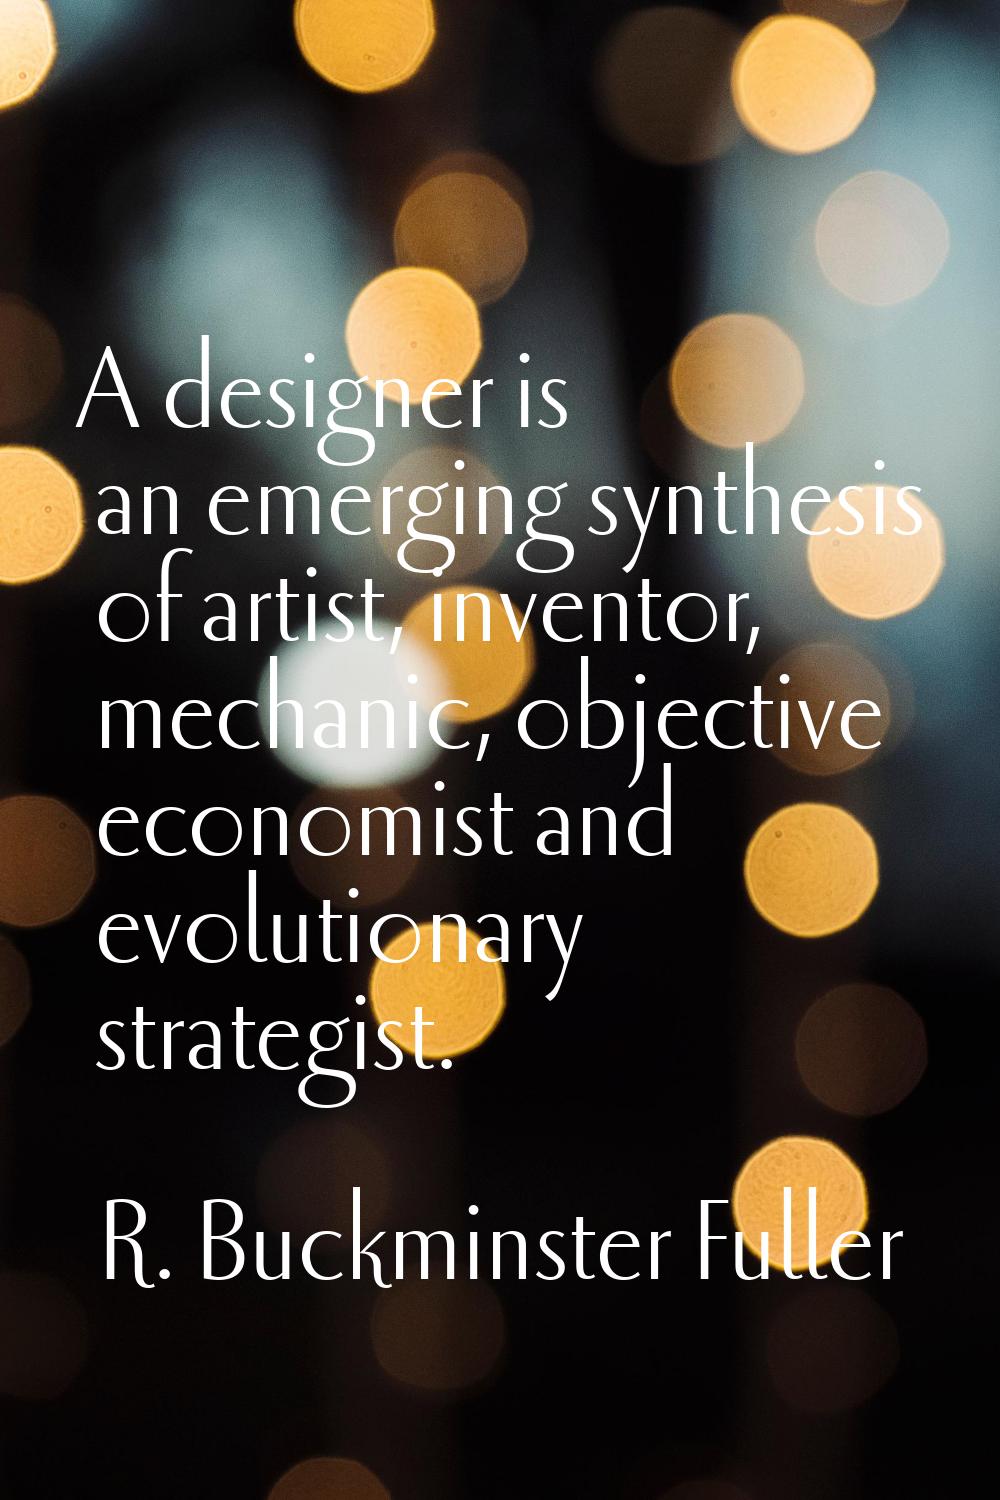 A designer is an emerging synthesis of artist, inventor, mechanic, objective economist and evolutio